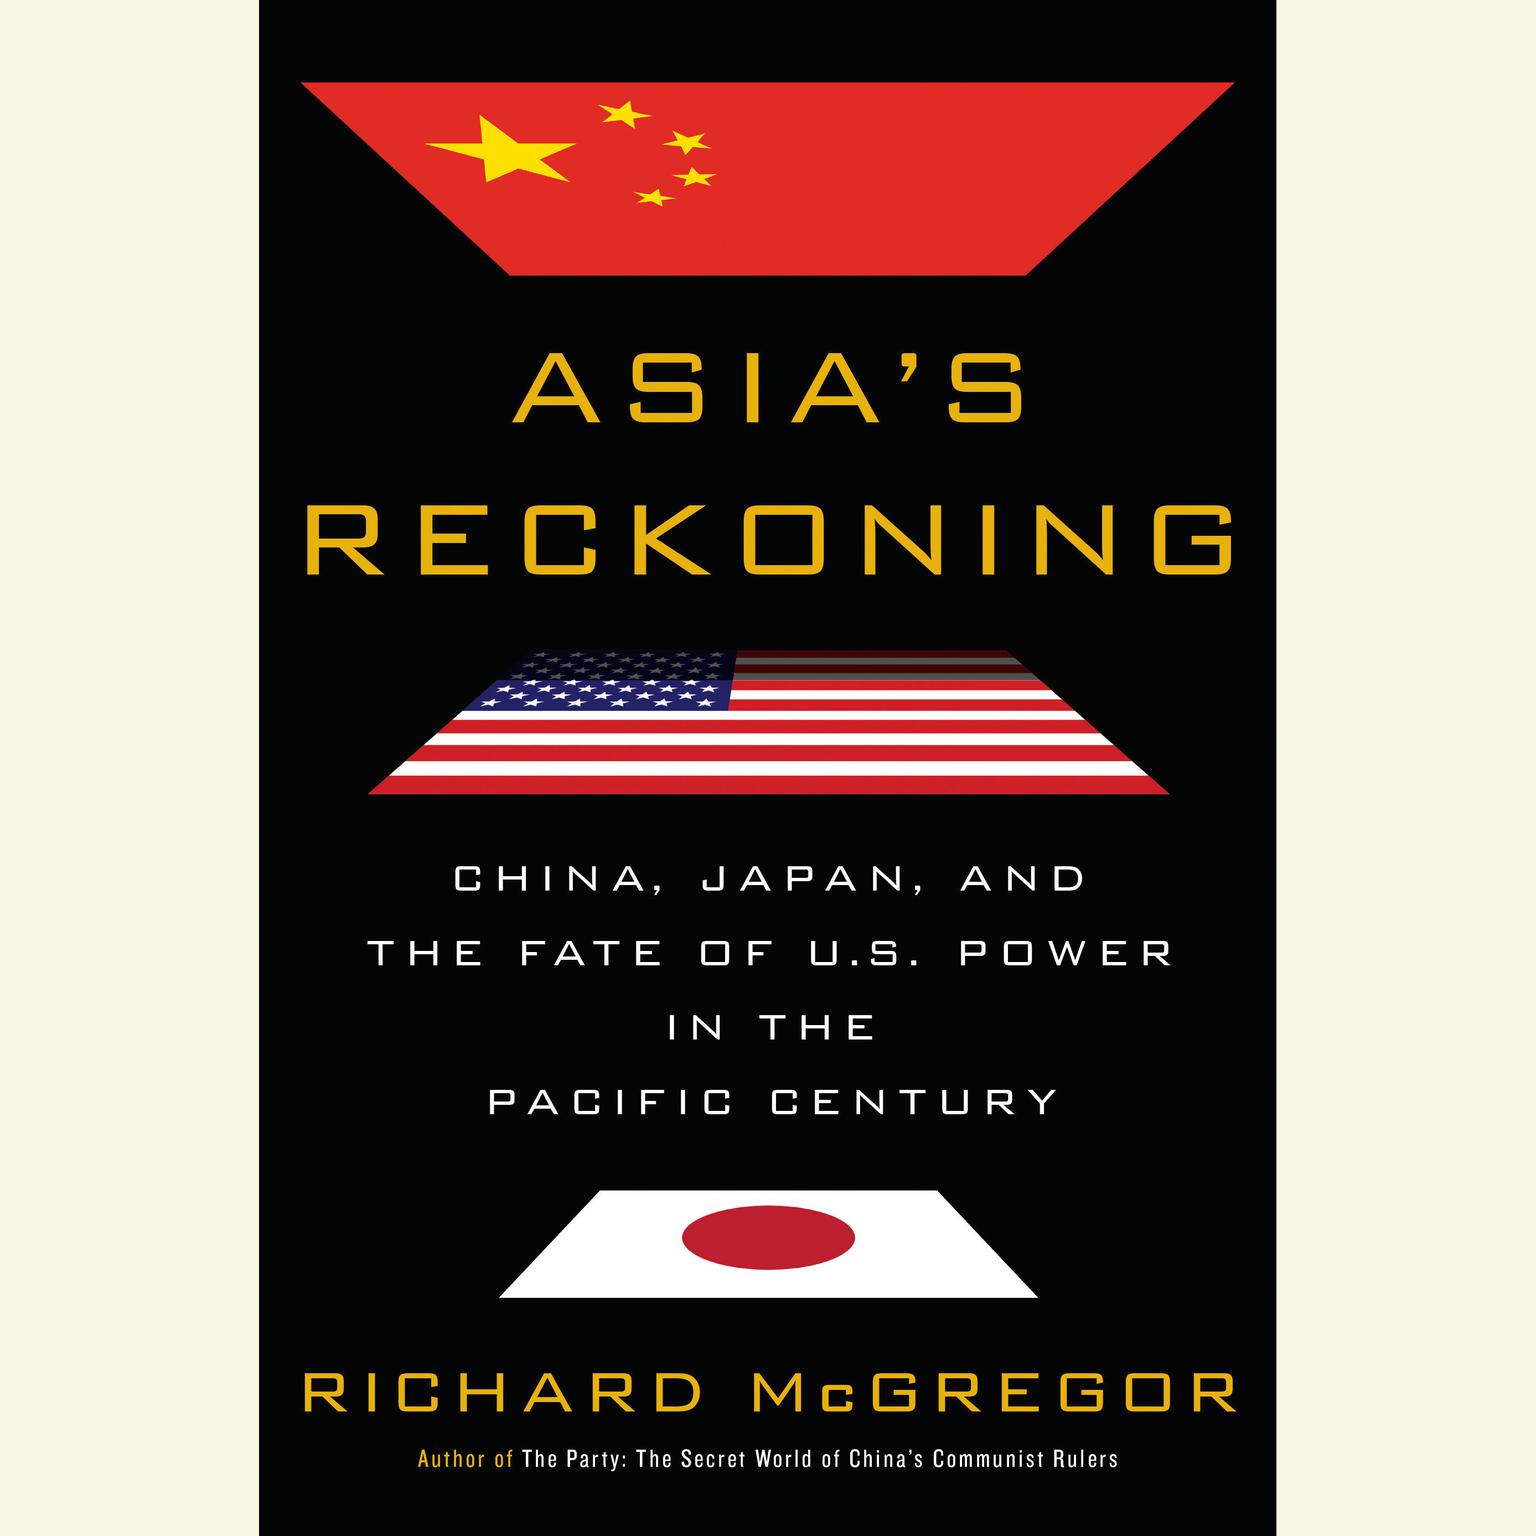 Asias Reckoning: China, Japan, and the Fate of U.S. Power in the Pacific Century Audiobook, by Richard Mcgregor